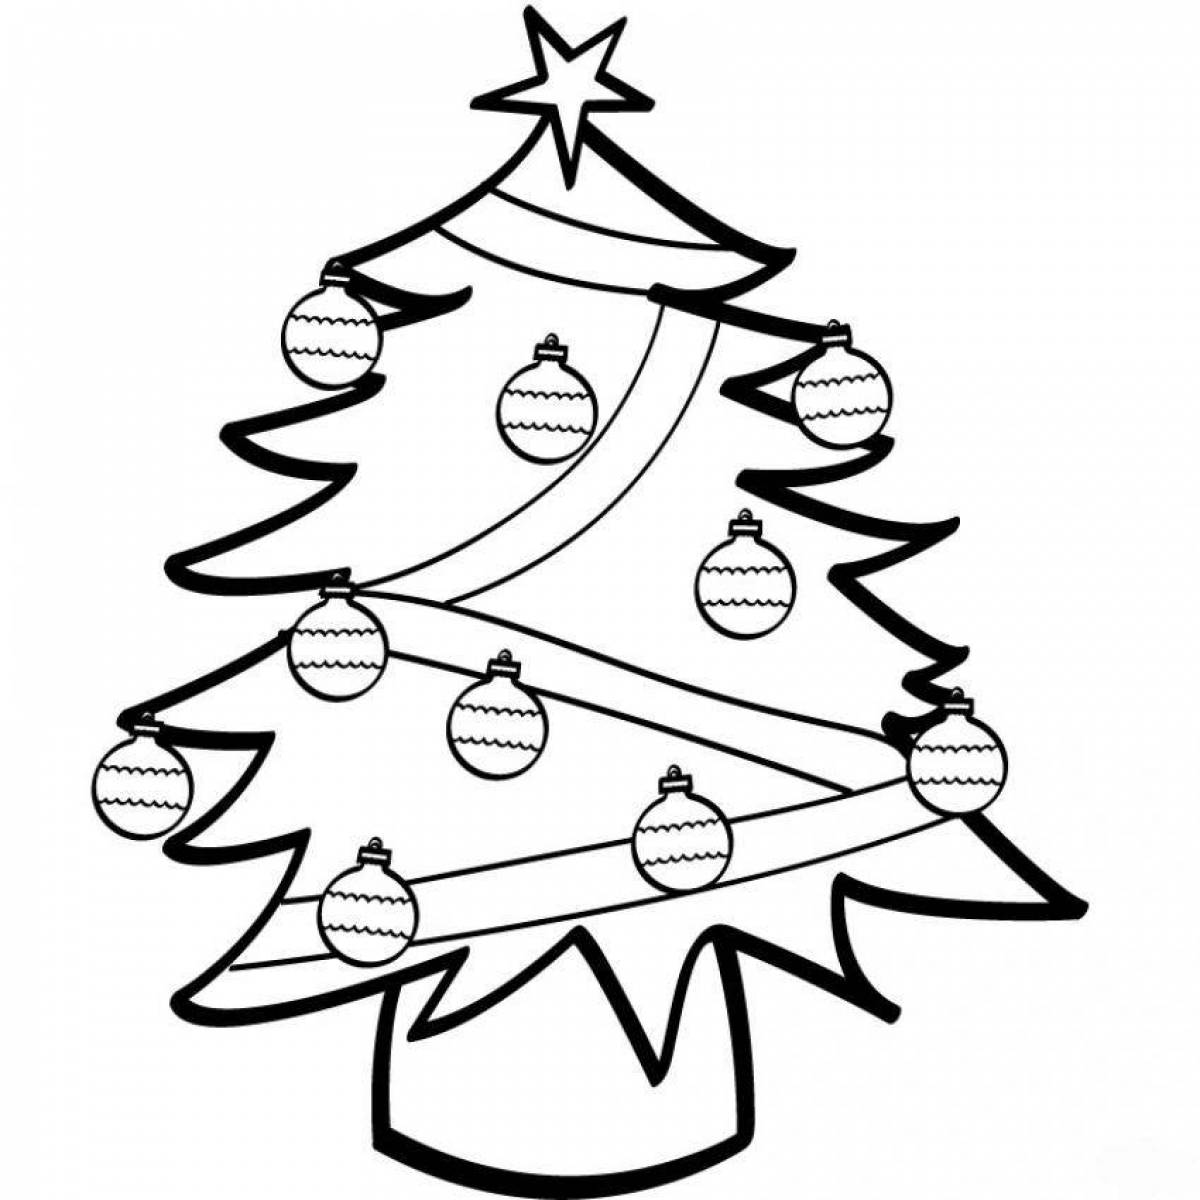 Sweet Christmas tree coloring book for 3-4 year olds